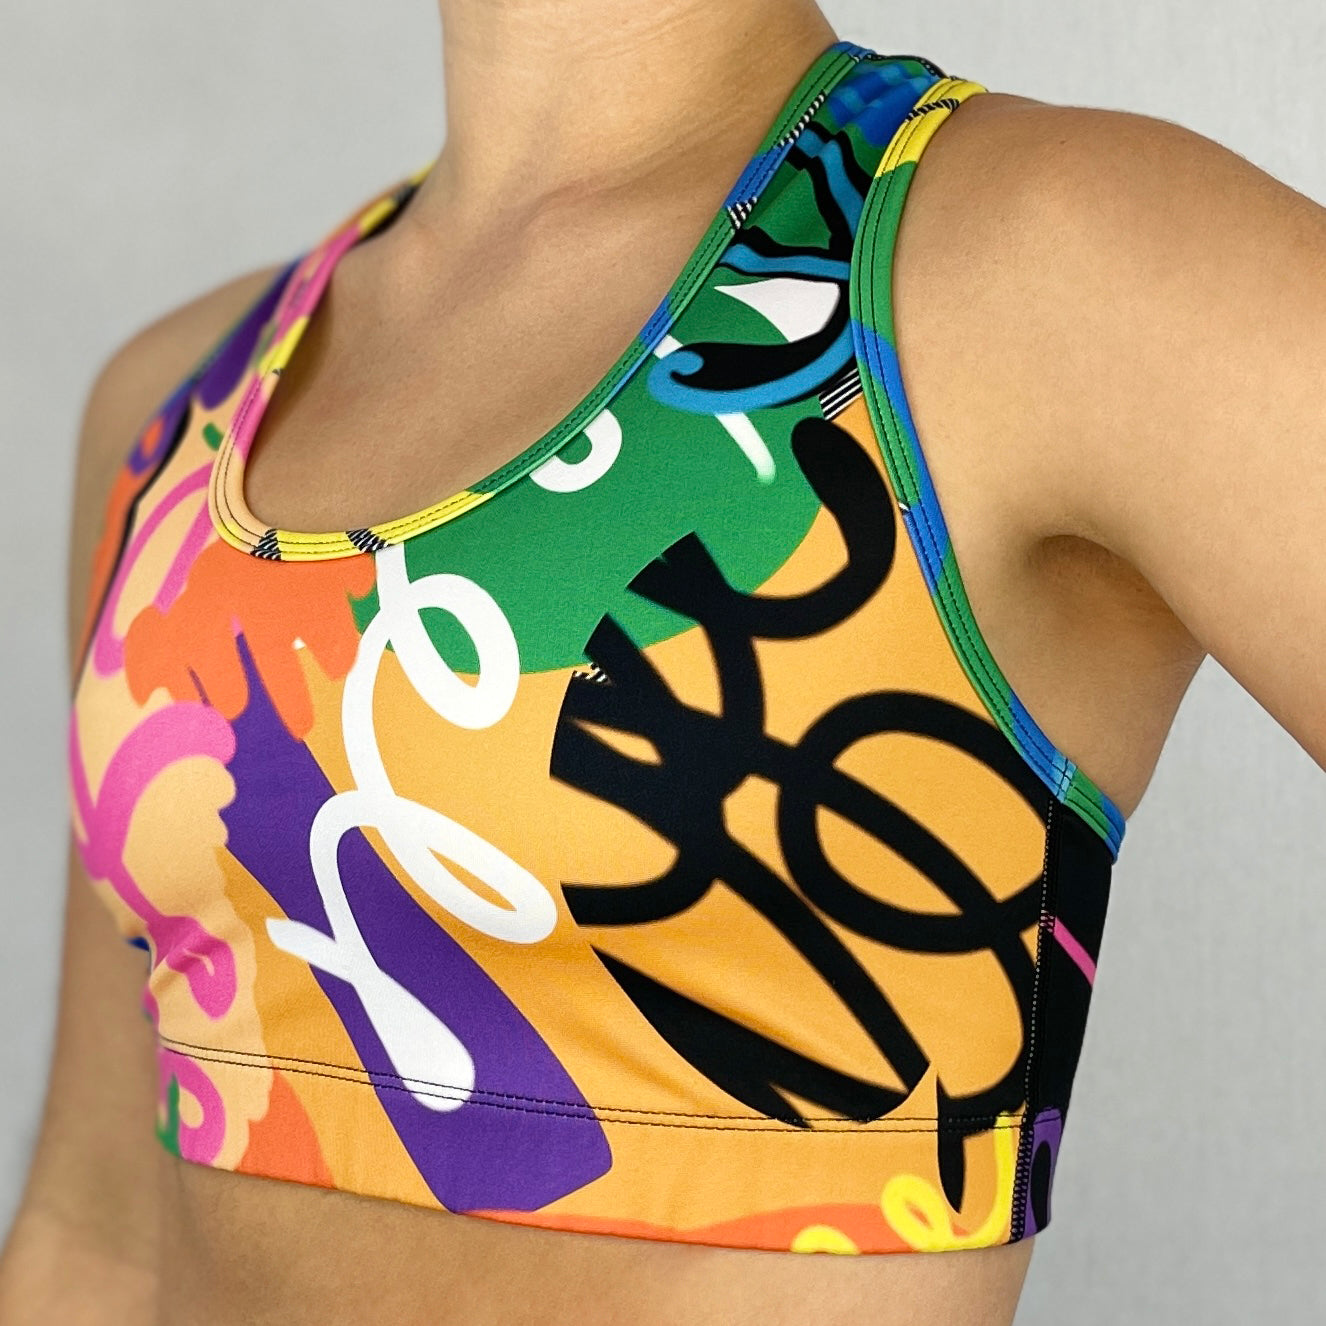 colourful sports bra made sustainably from recycled materials - Venus - side